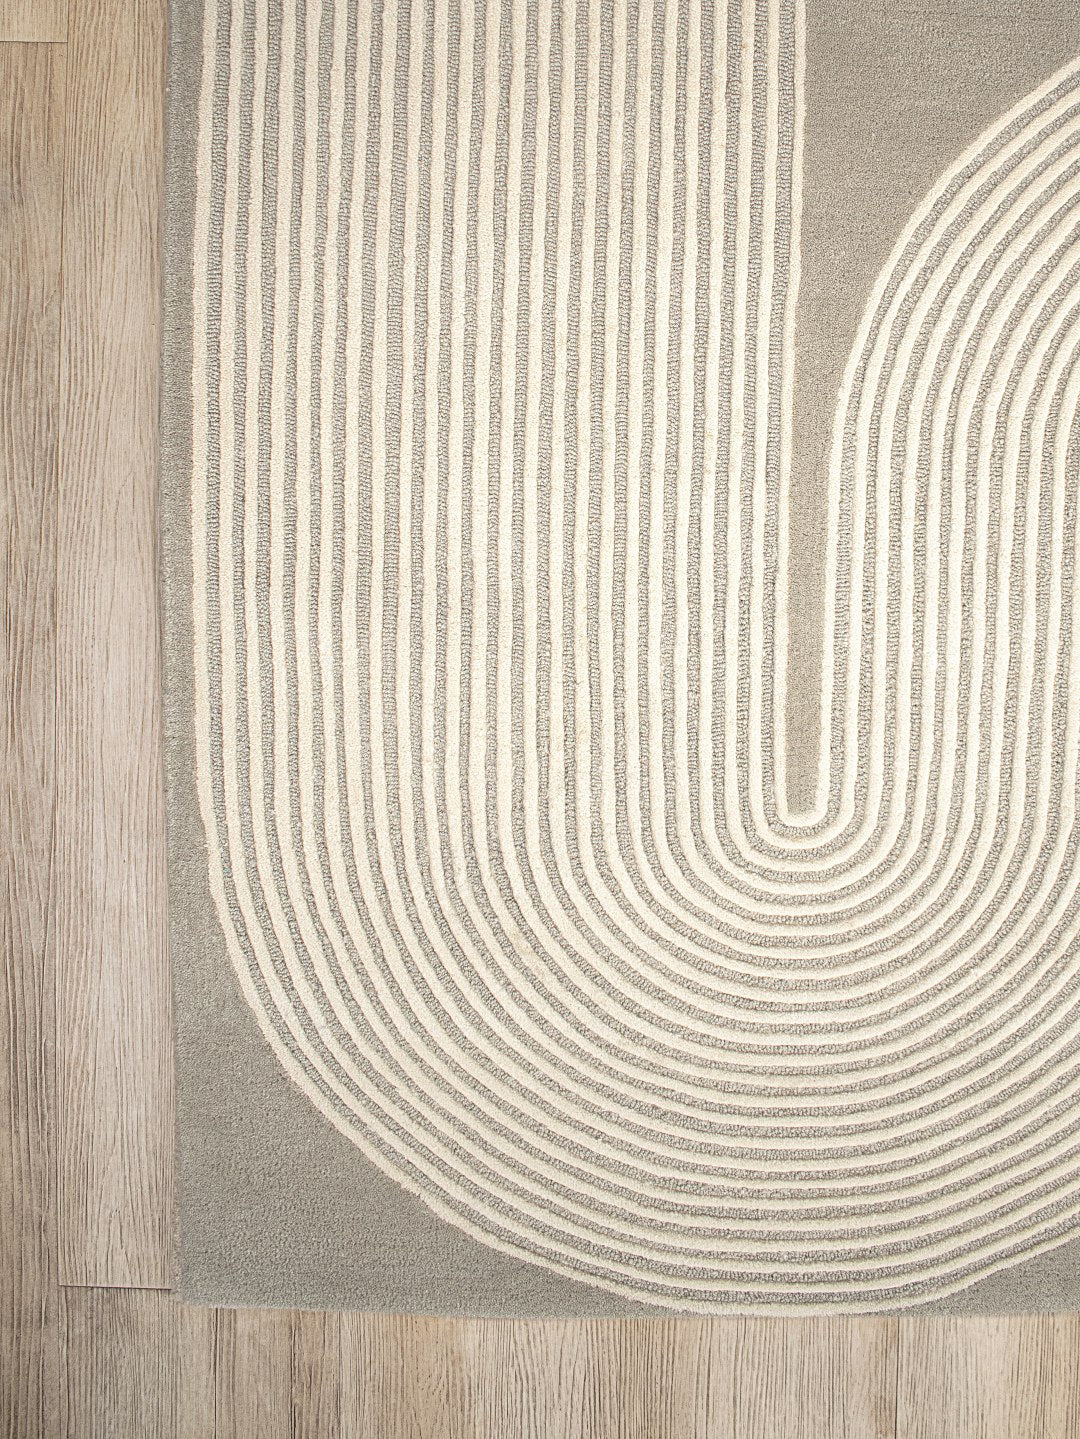 Viper rug - The Rug Collection